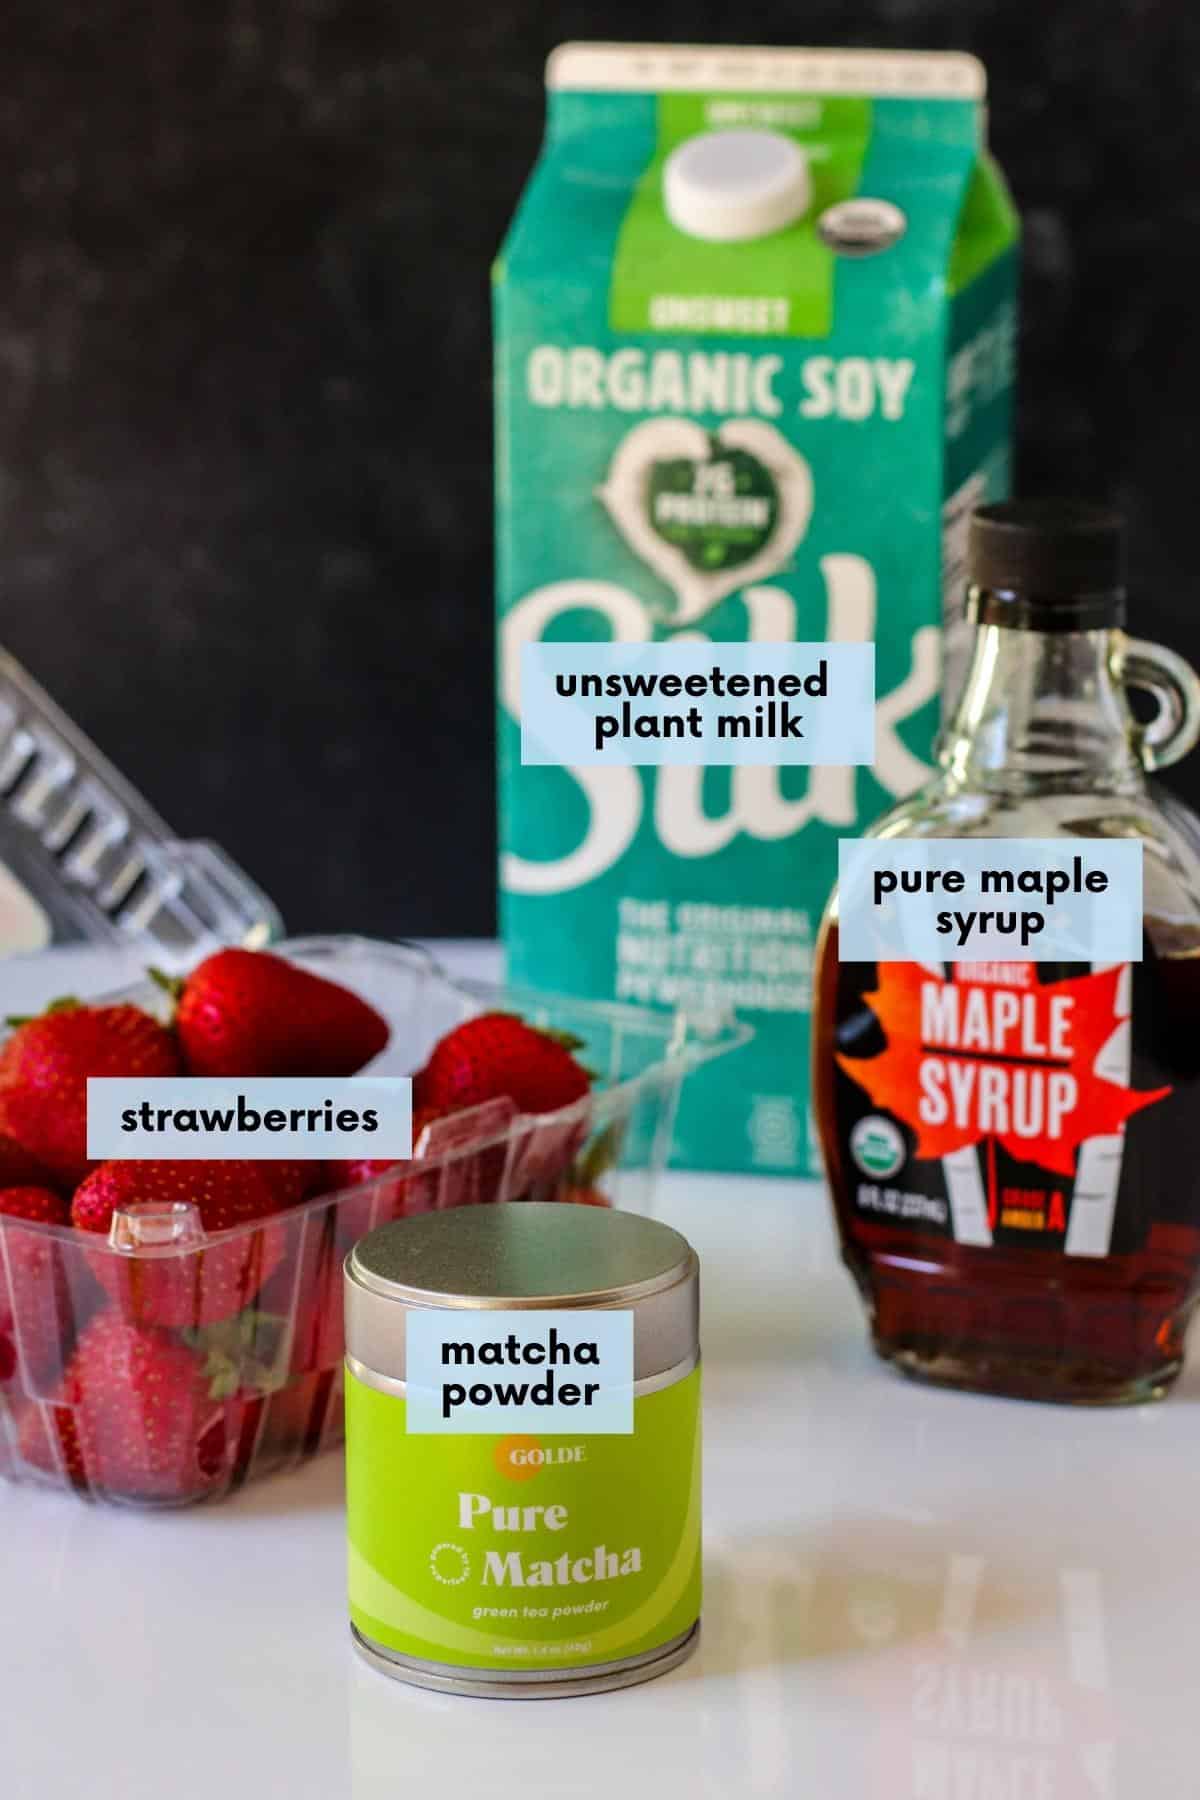 Labeled ingredients needed to make this recipe: Strawberries, non-dairy milk, pure maple syrup, and matcha powder.